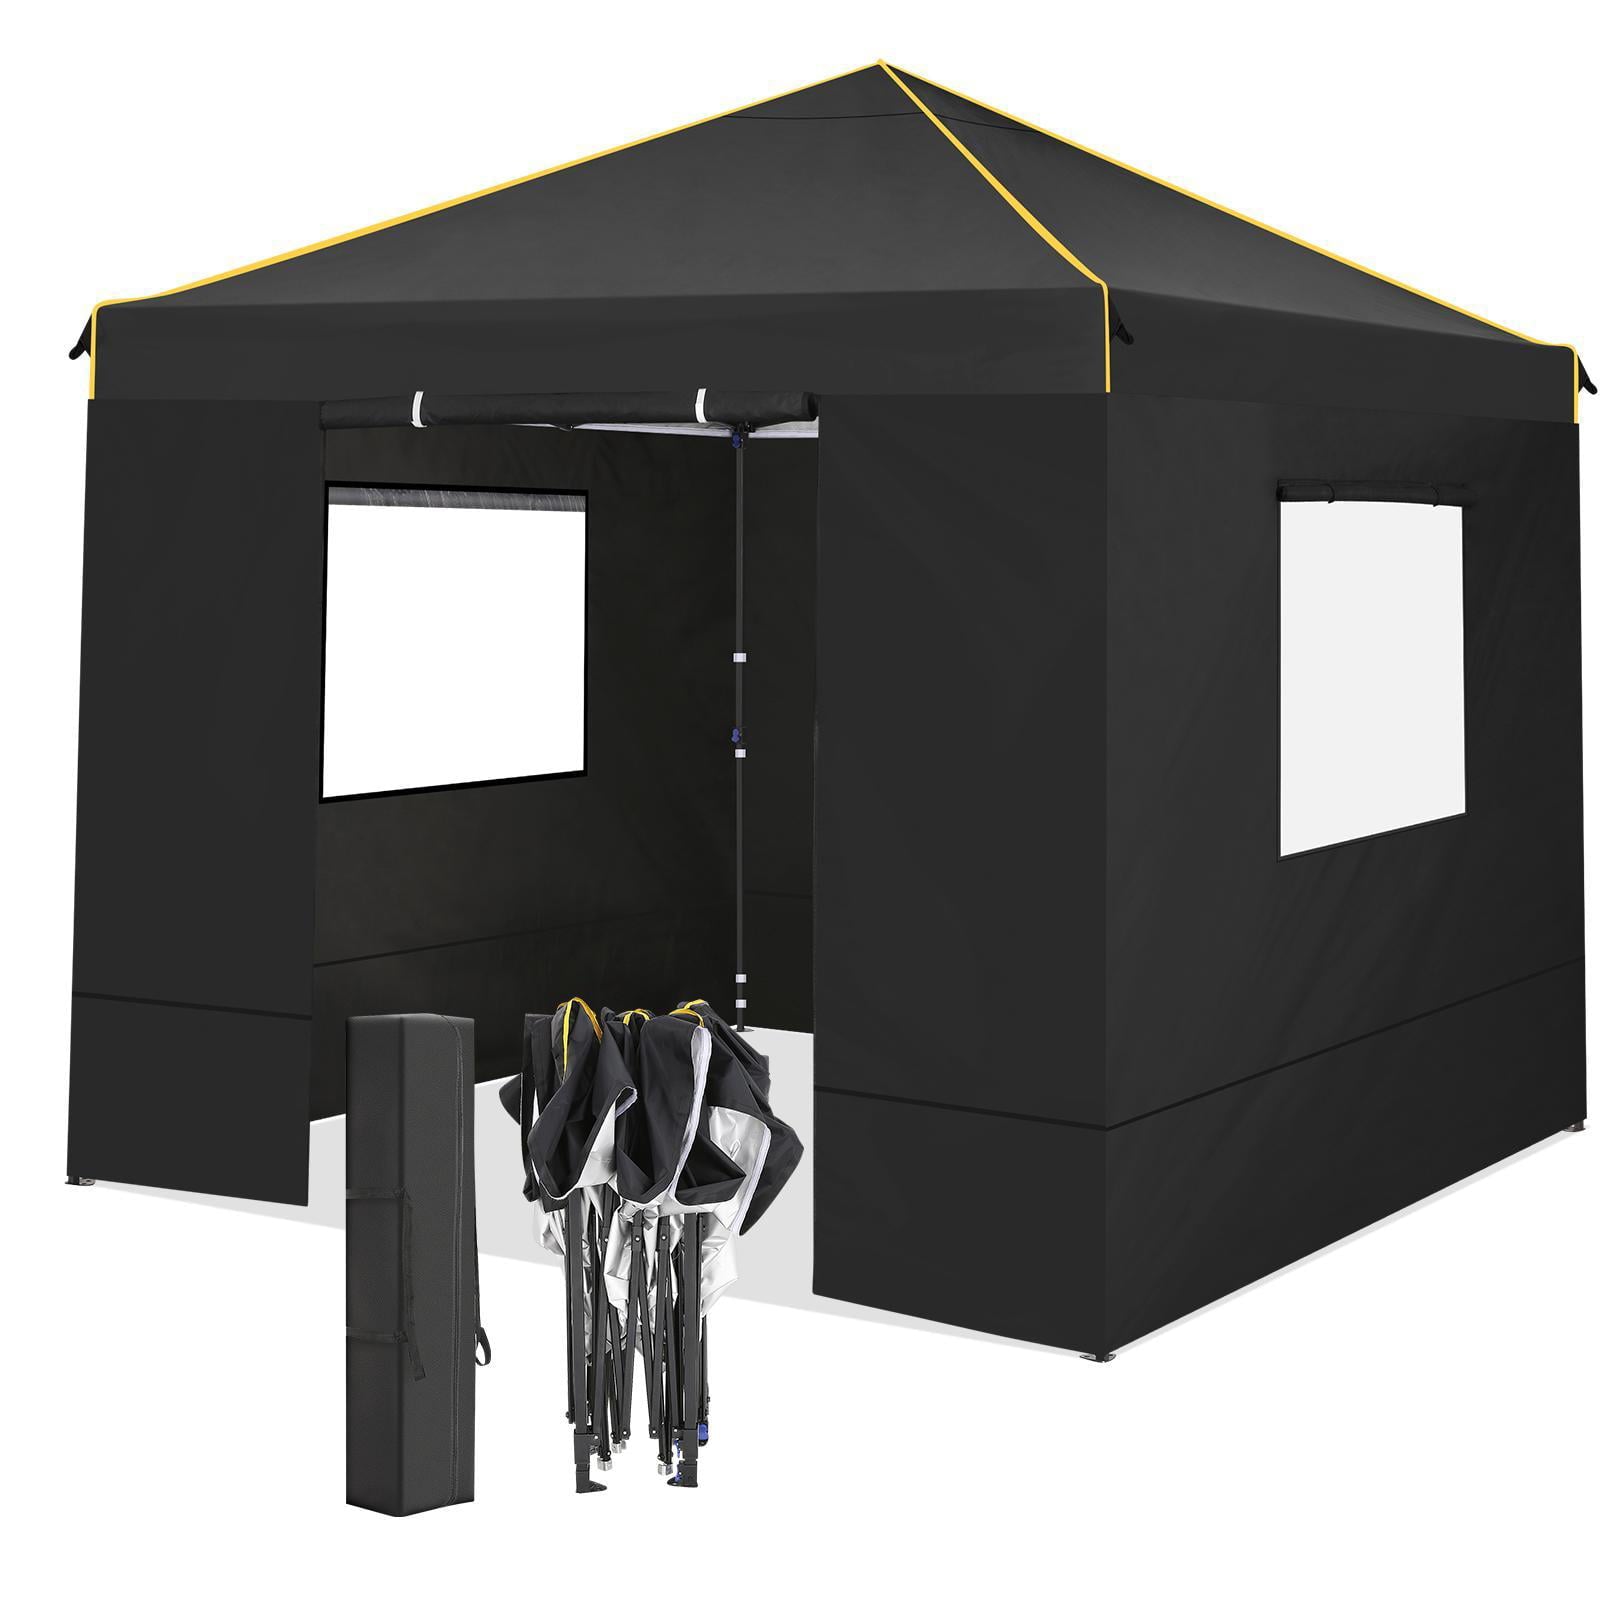 Likein 10x10 ft Pop Up Canopy Tent with 4 Removable Sidewalls, Commercial Instant Gazebo Tent, Outdoor Canopy Tents for Party/Exhibition/Picnic with Carry Bag, Clearance - Black